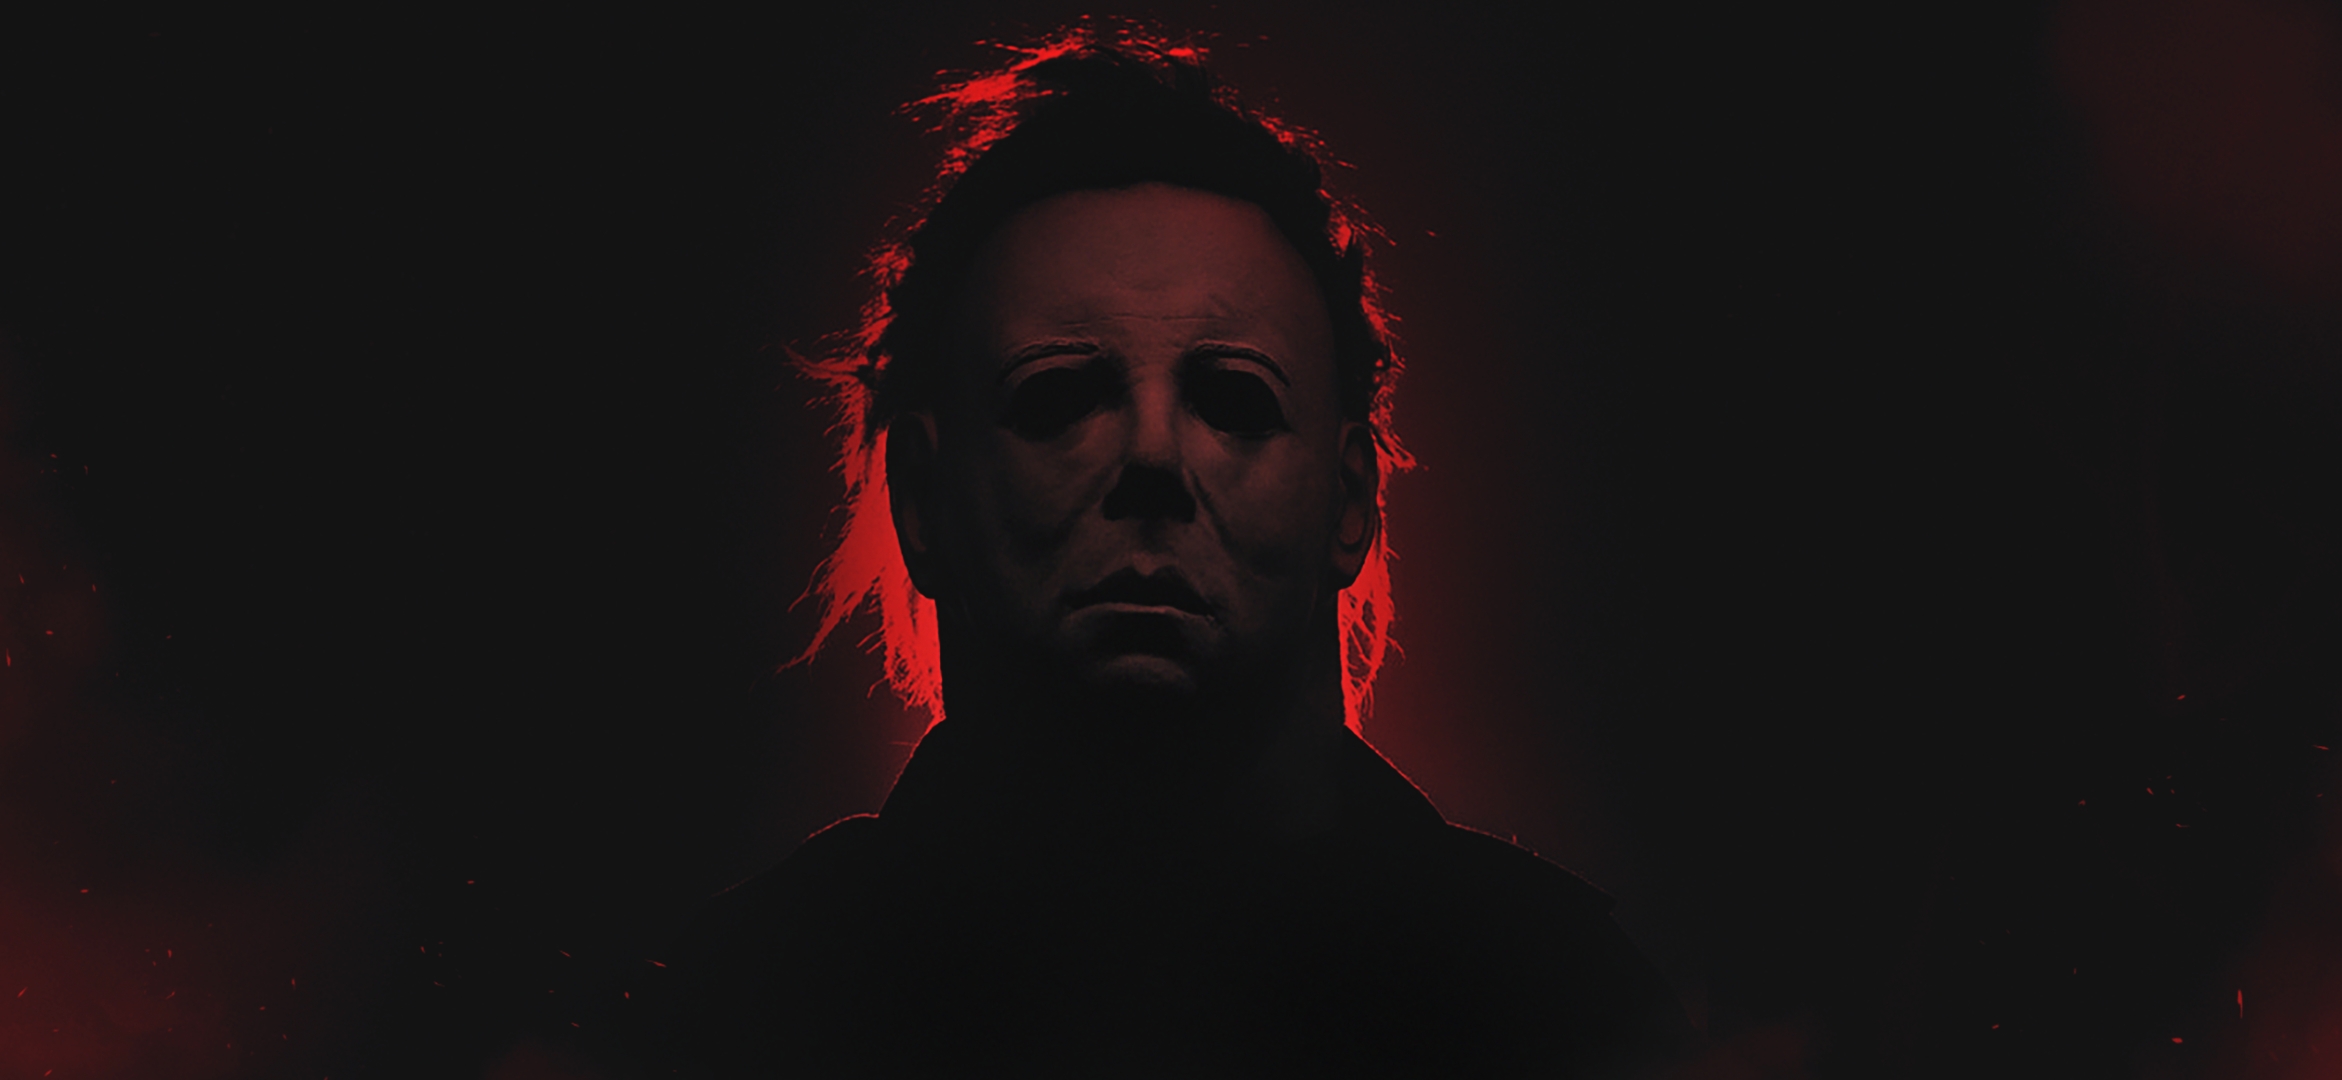 10 Best Michael Myers Hd Wallpaper FULL HD 1080p For PC Background